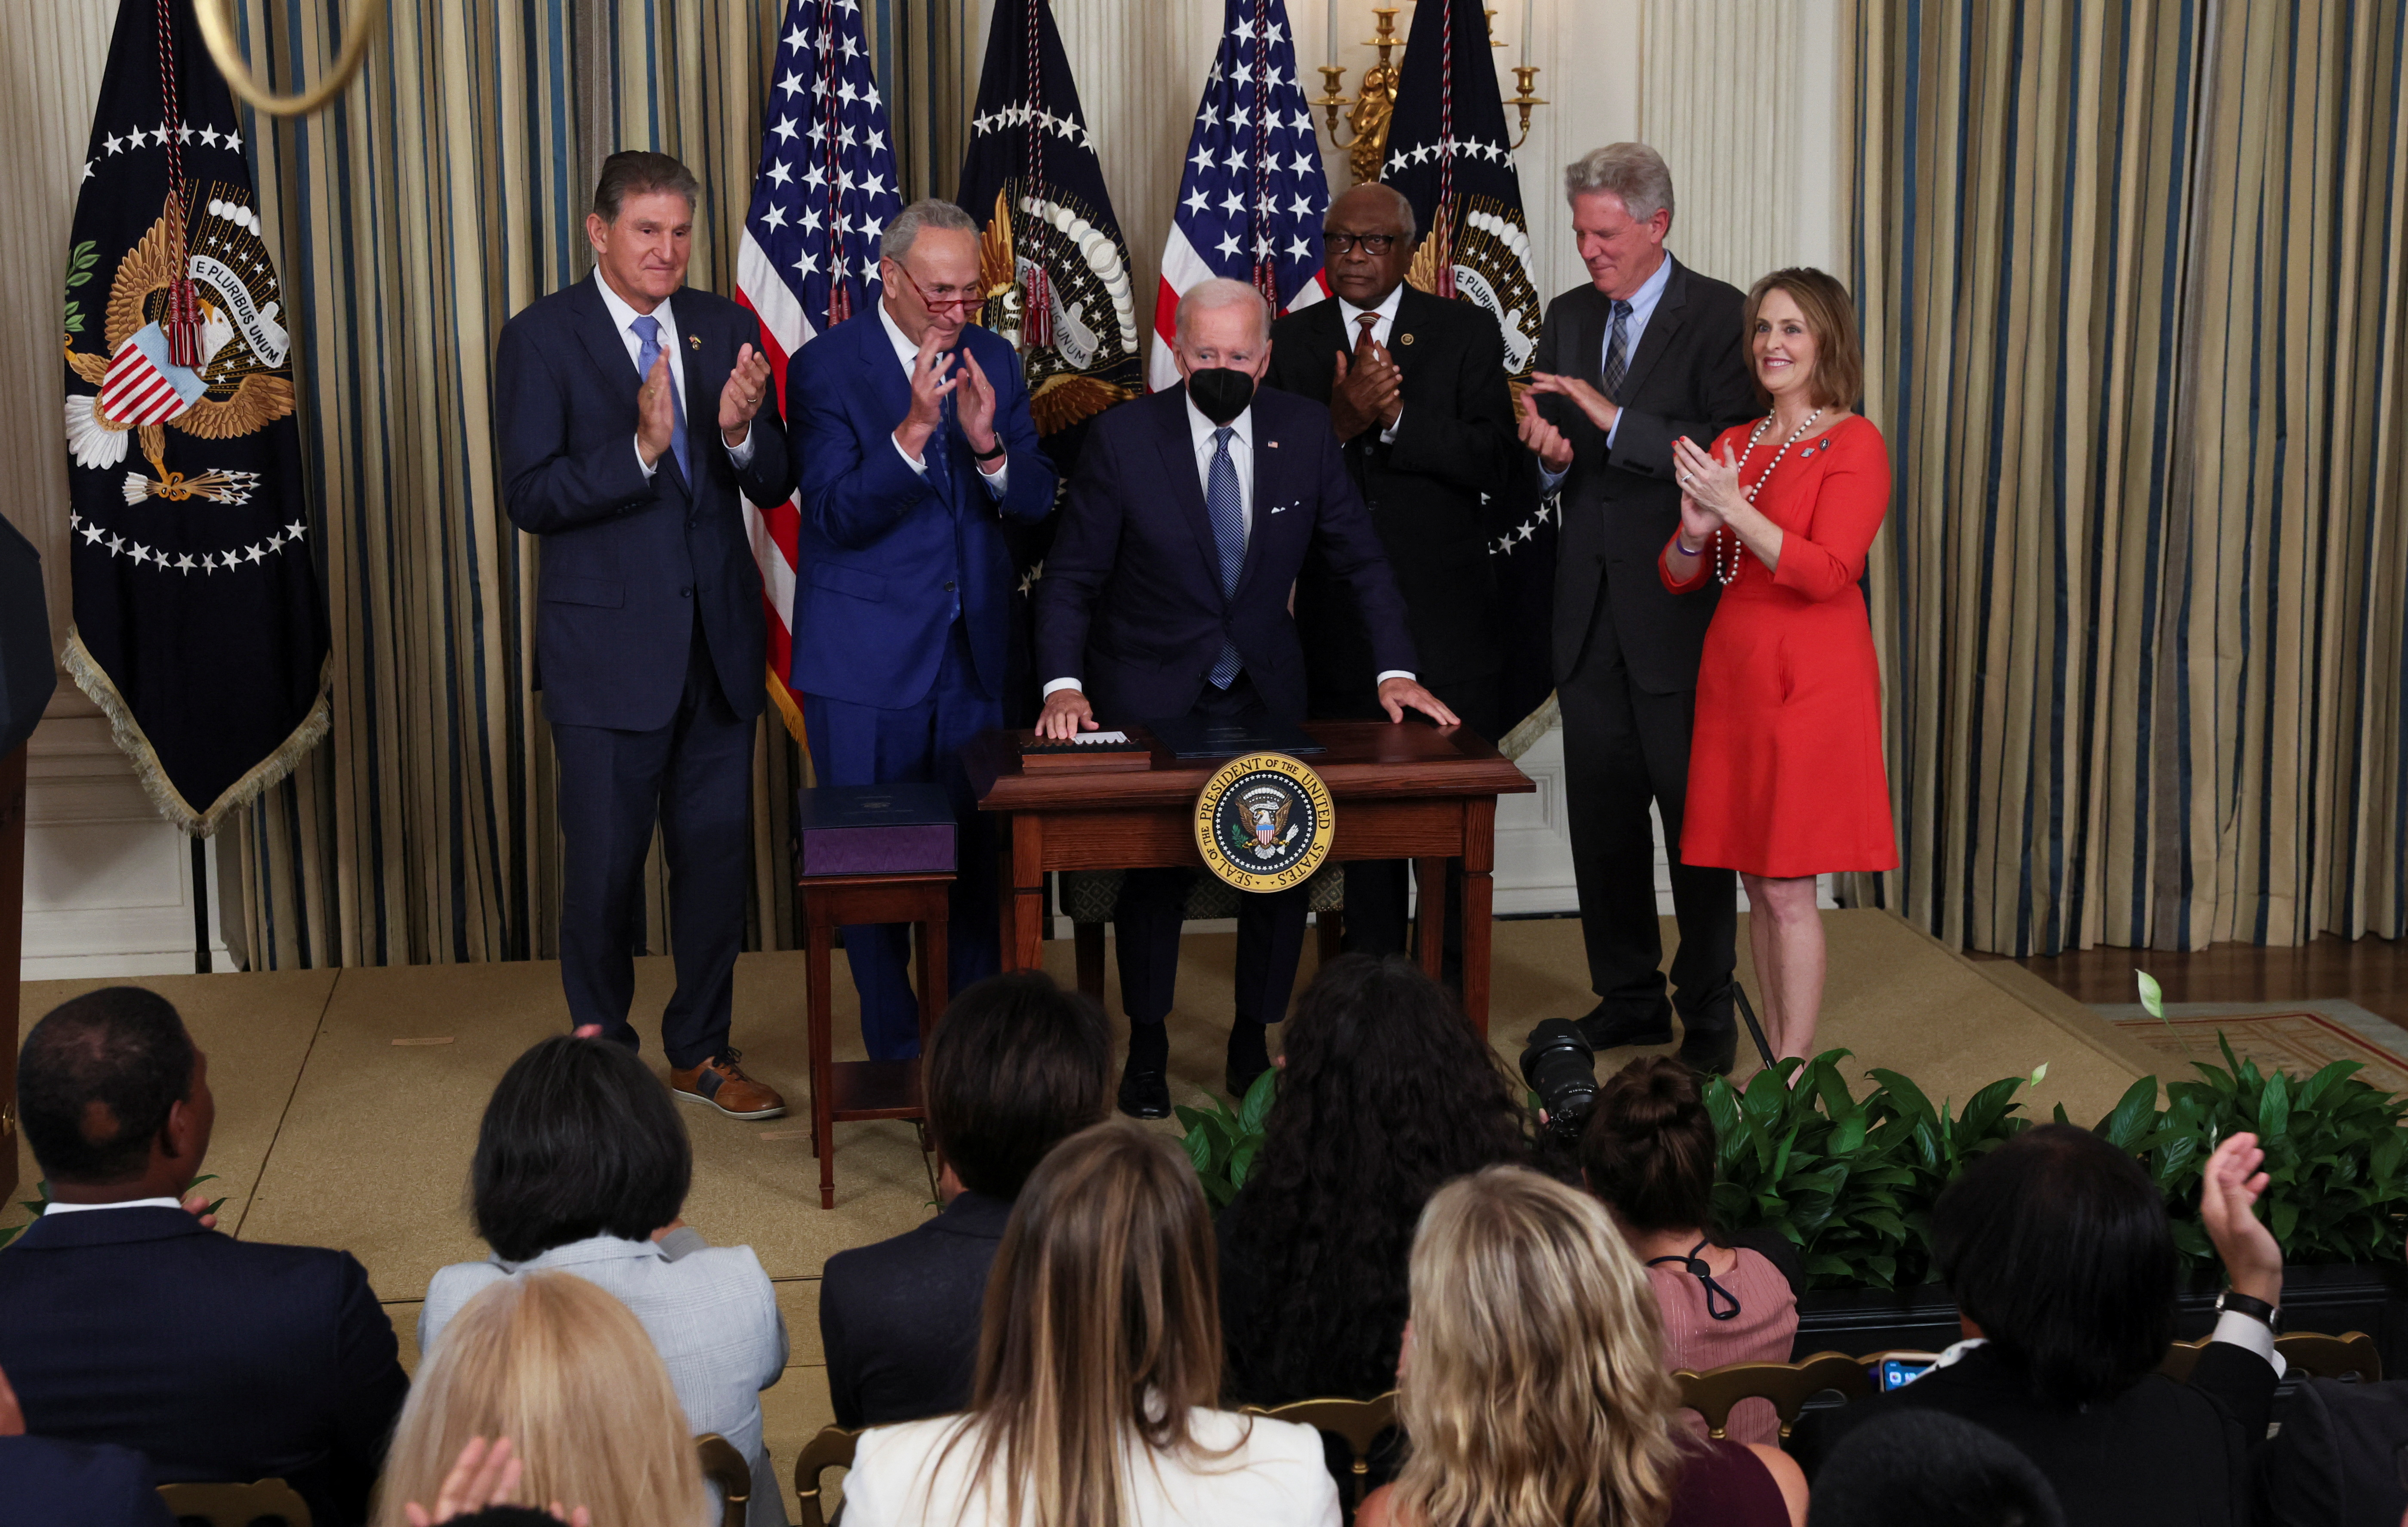 U.S. President Joe Biden signs "The Inflation Reduction Act of 2022" into law at the White House in Washington